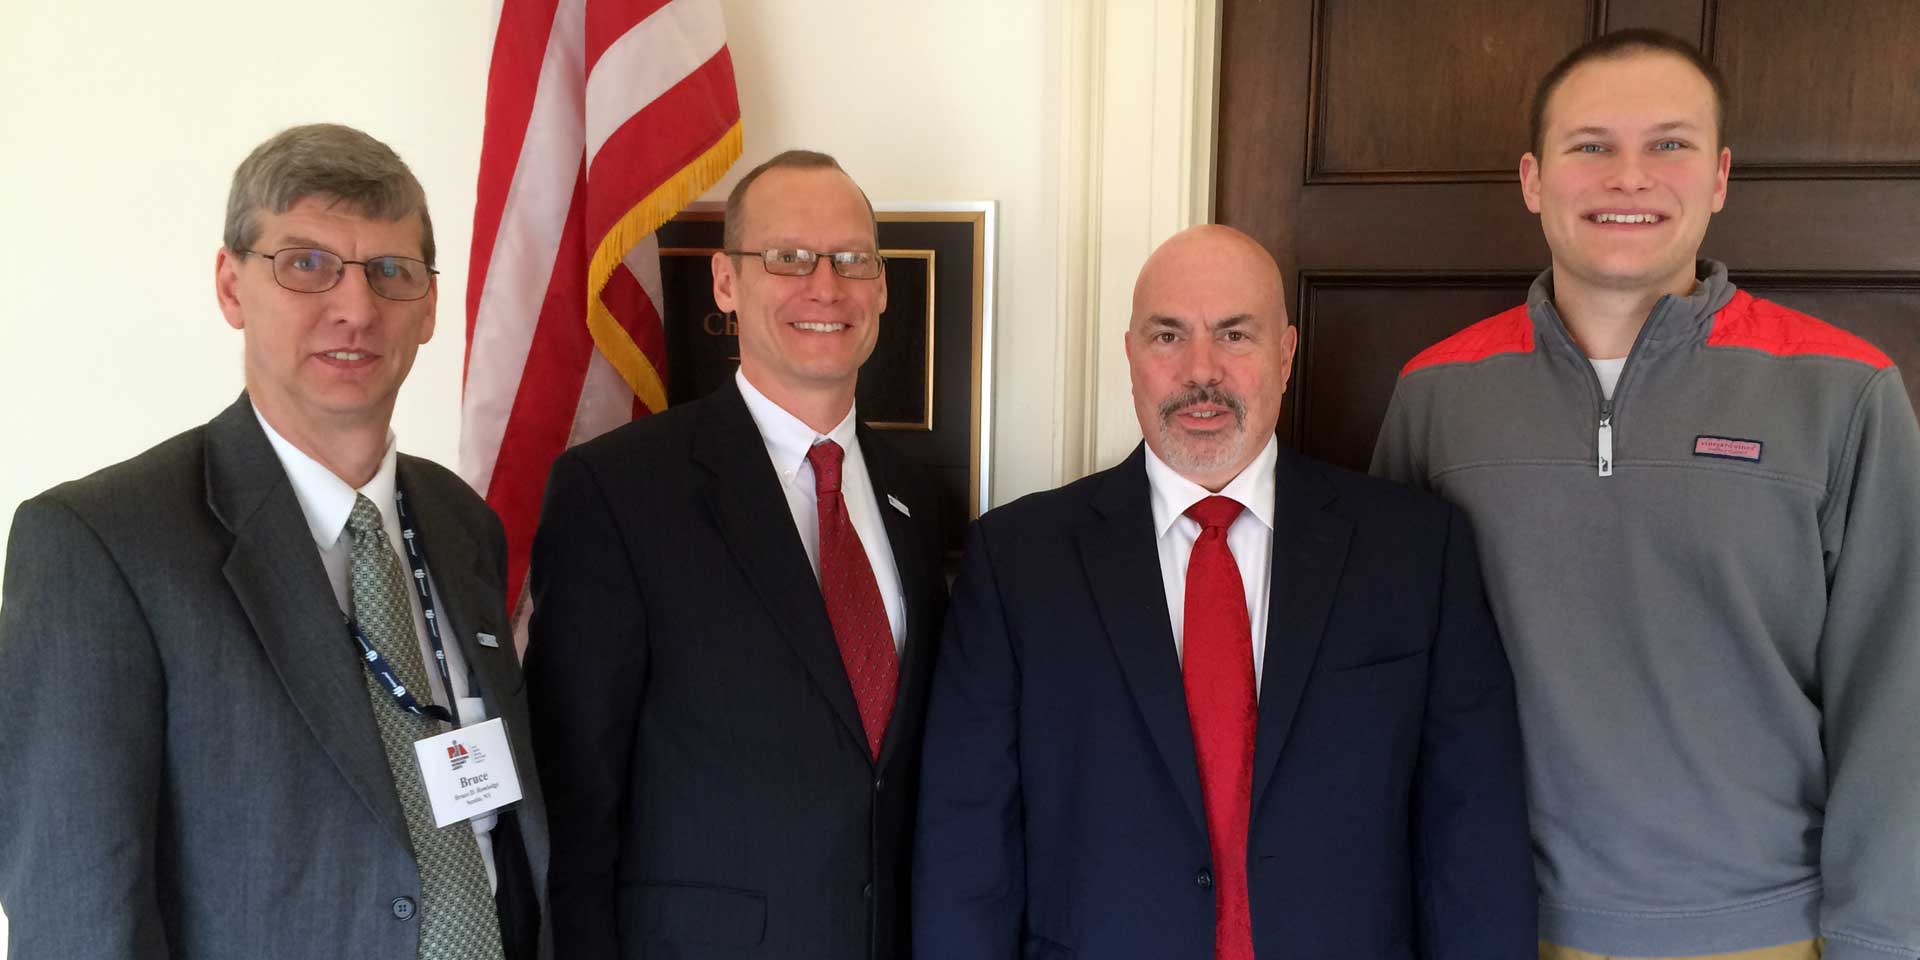 L-R: PIANY Secretary Bruce D. Rowledge; PIANY Director of Government & Industry Affairs Matthew F. Guilbault, Esq.; PIANY past President Richard A. Savino, CIC, CPIA; and Legislative Correspondent to Rep. Chris Gibson, R-19, Jeff Bishop.